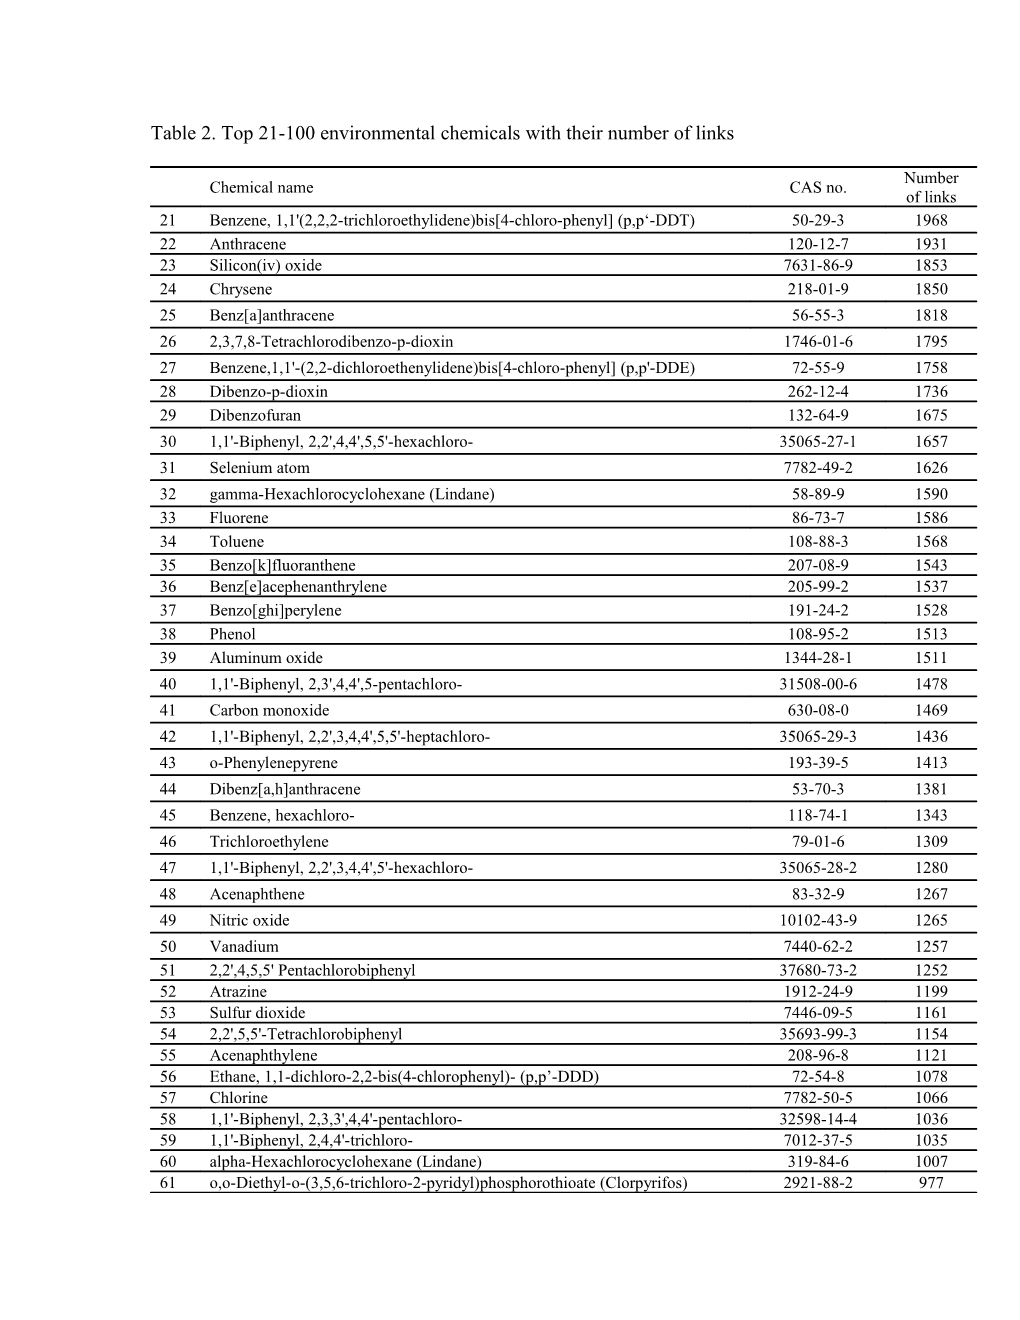 Table 2. Top 21-100 Environmental Chemicals with Their Number of Links